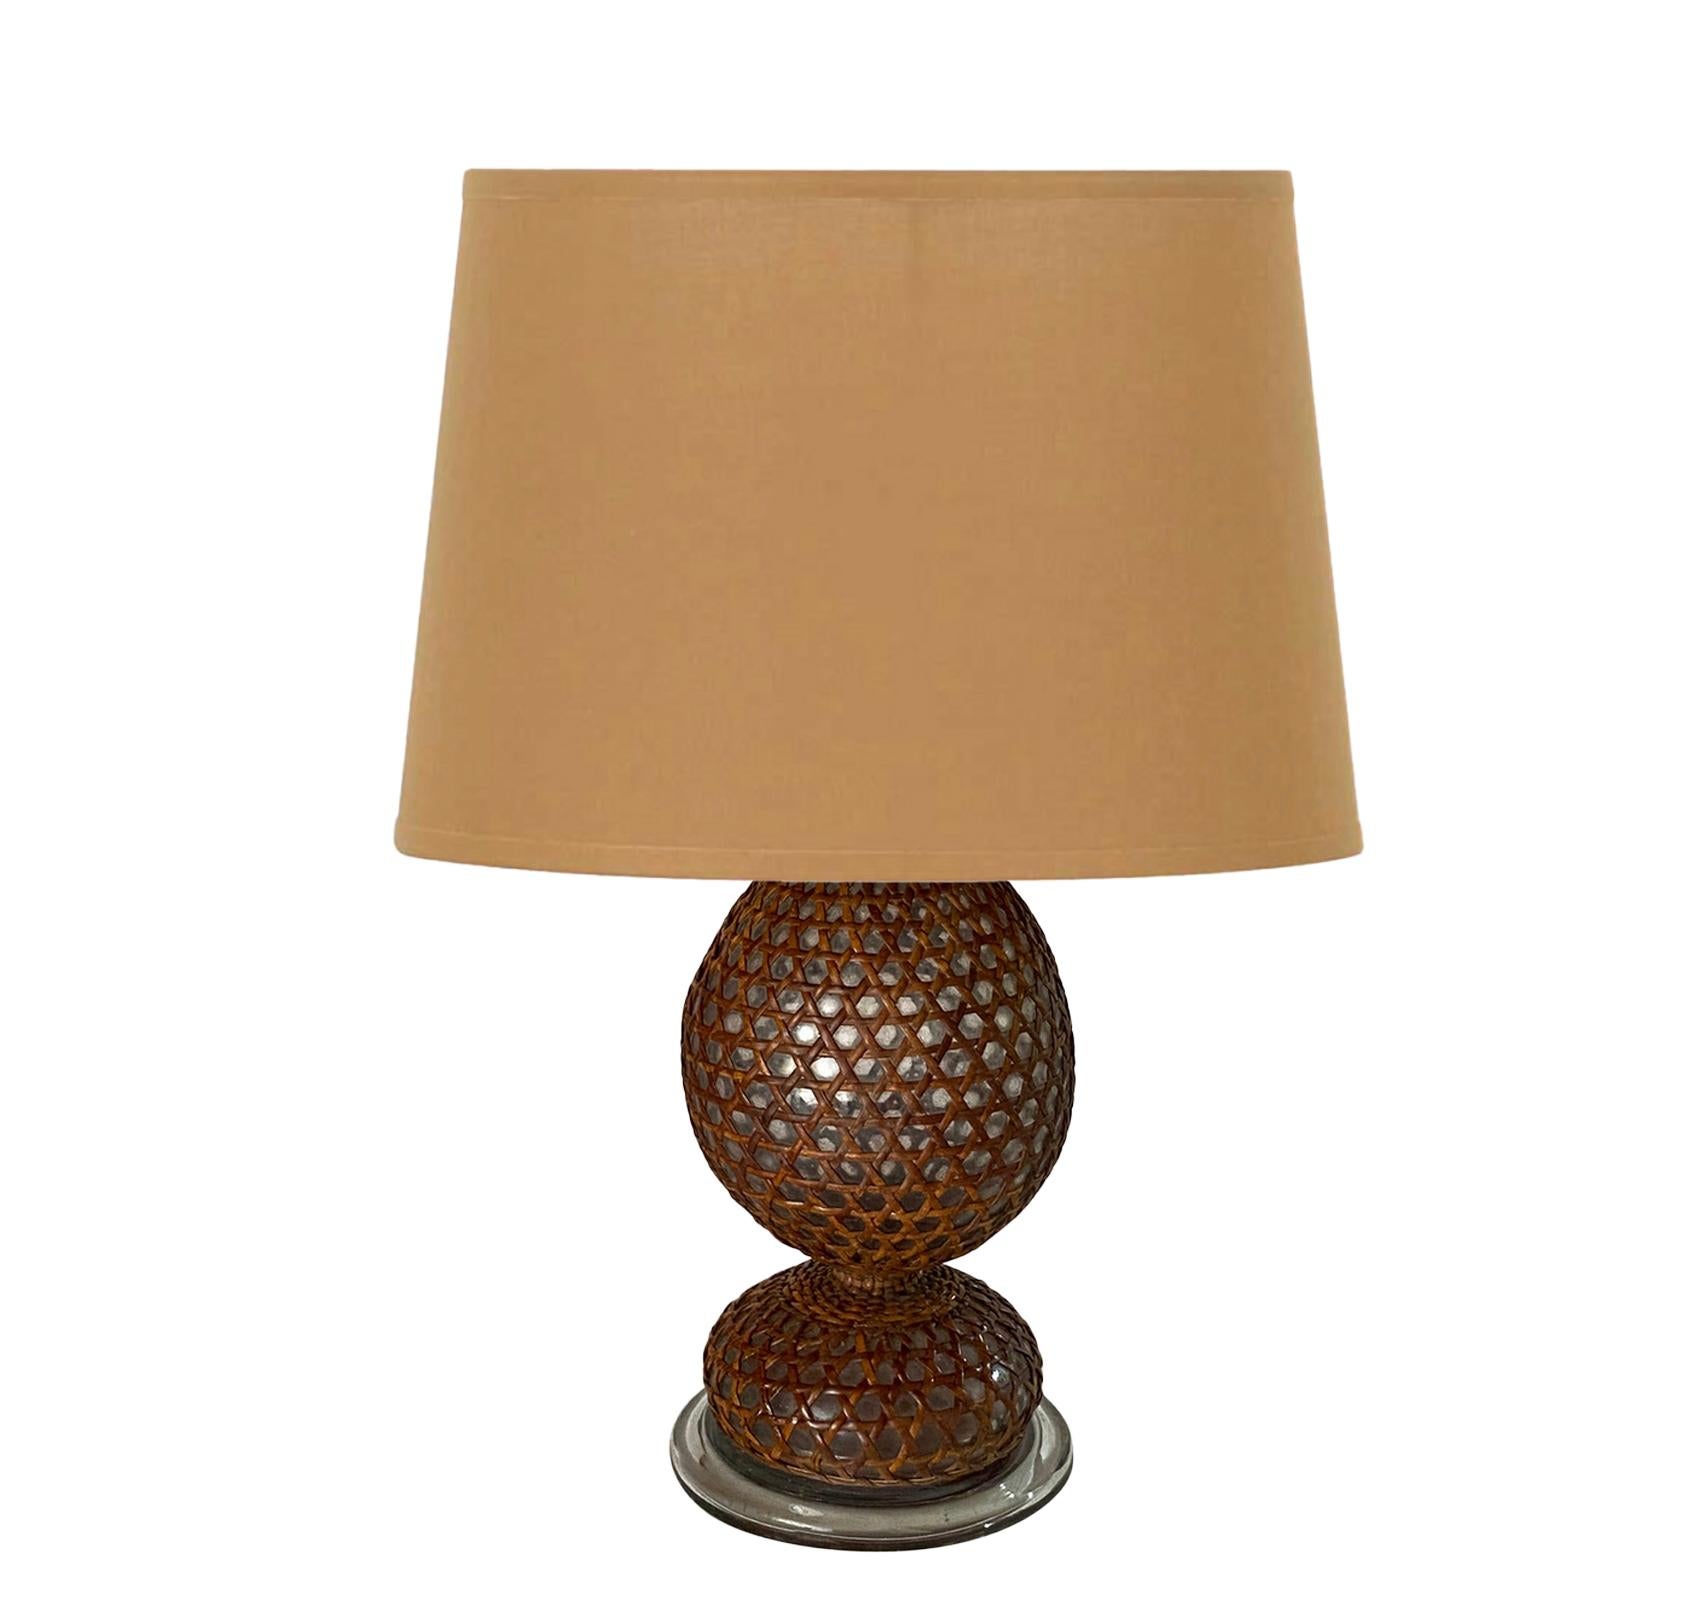 Glass and Rattan Table Lamp, Made in England, Brown Color, Circa 1970 For Sale 9